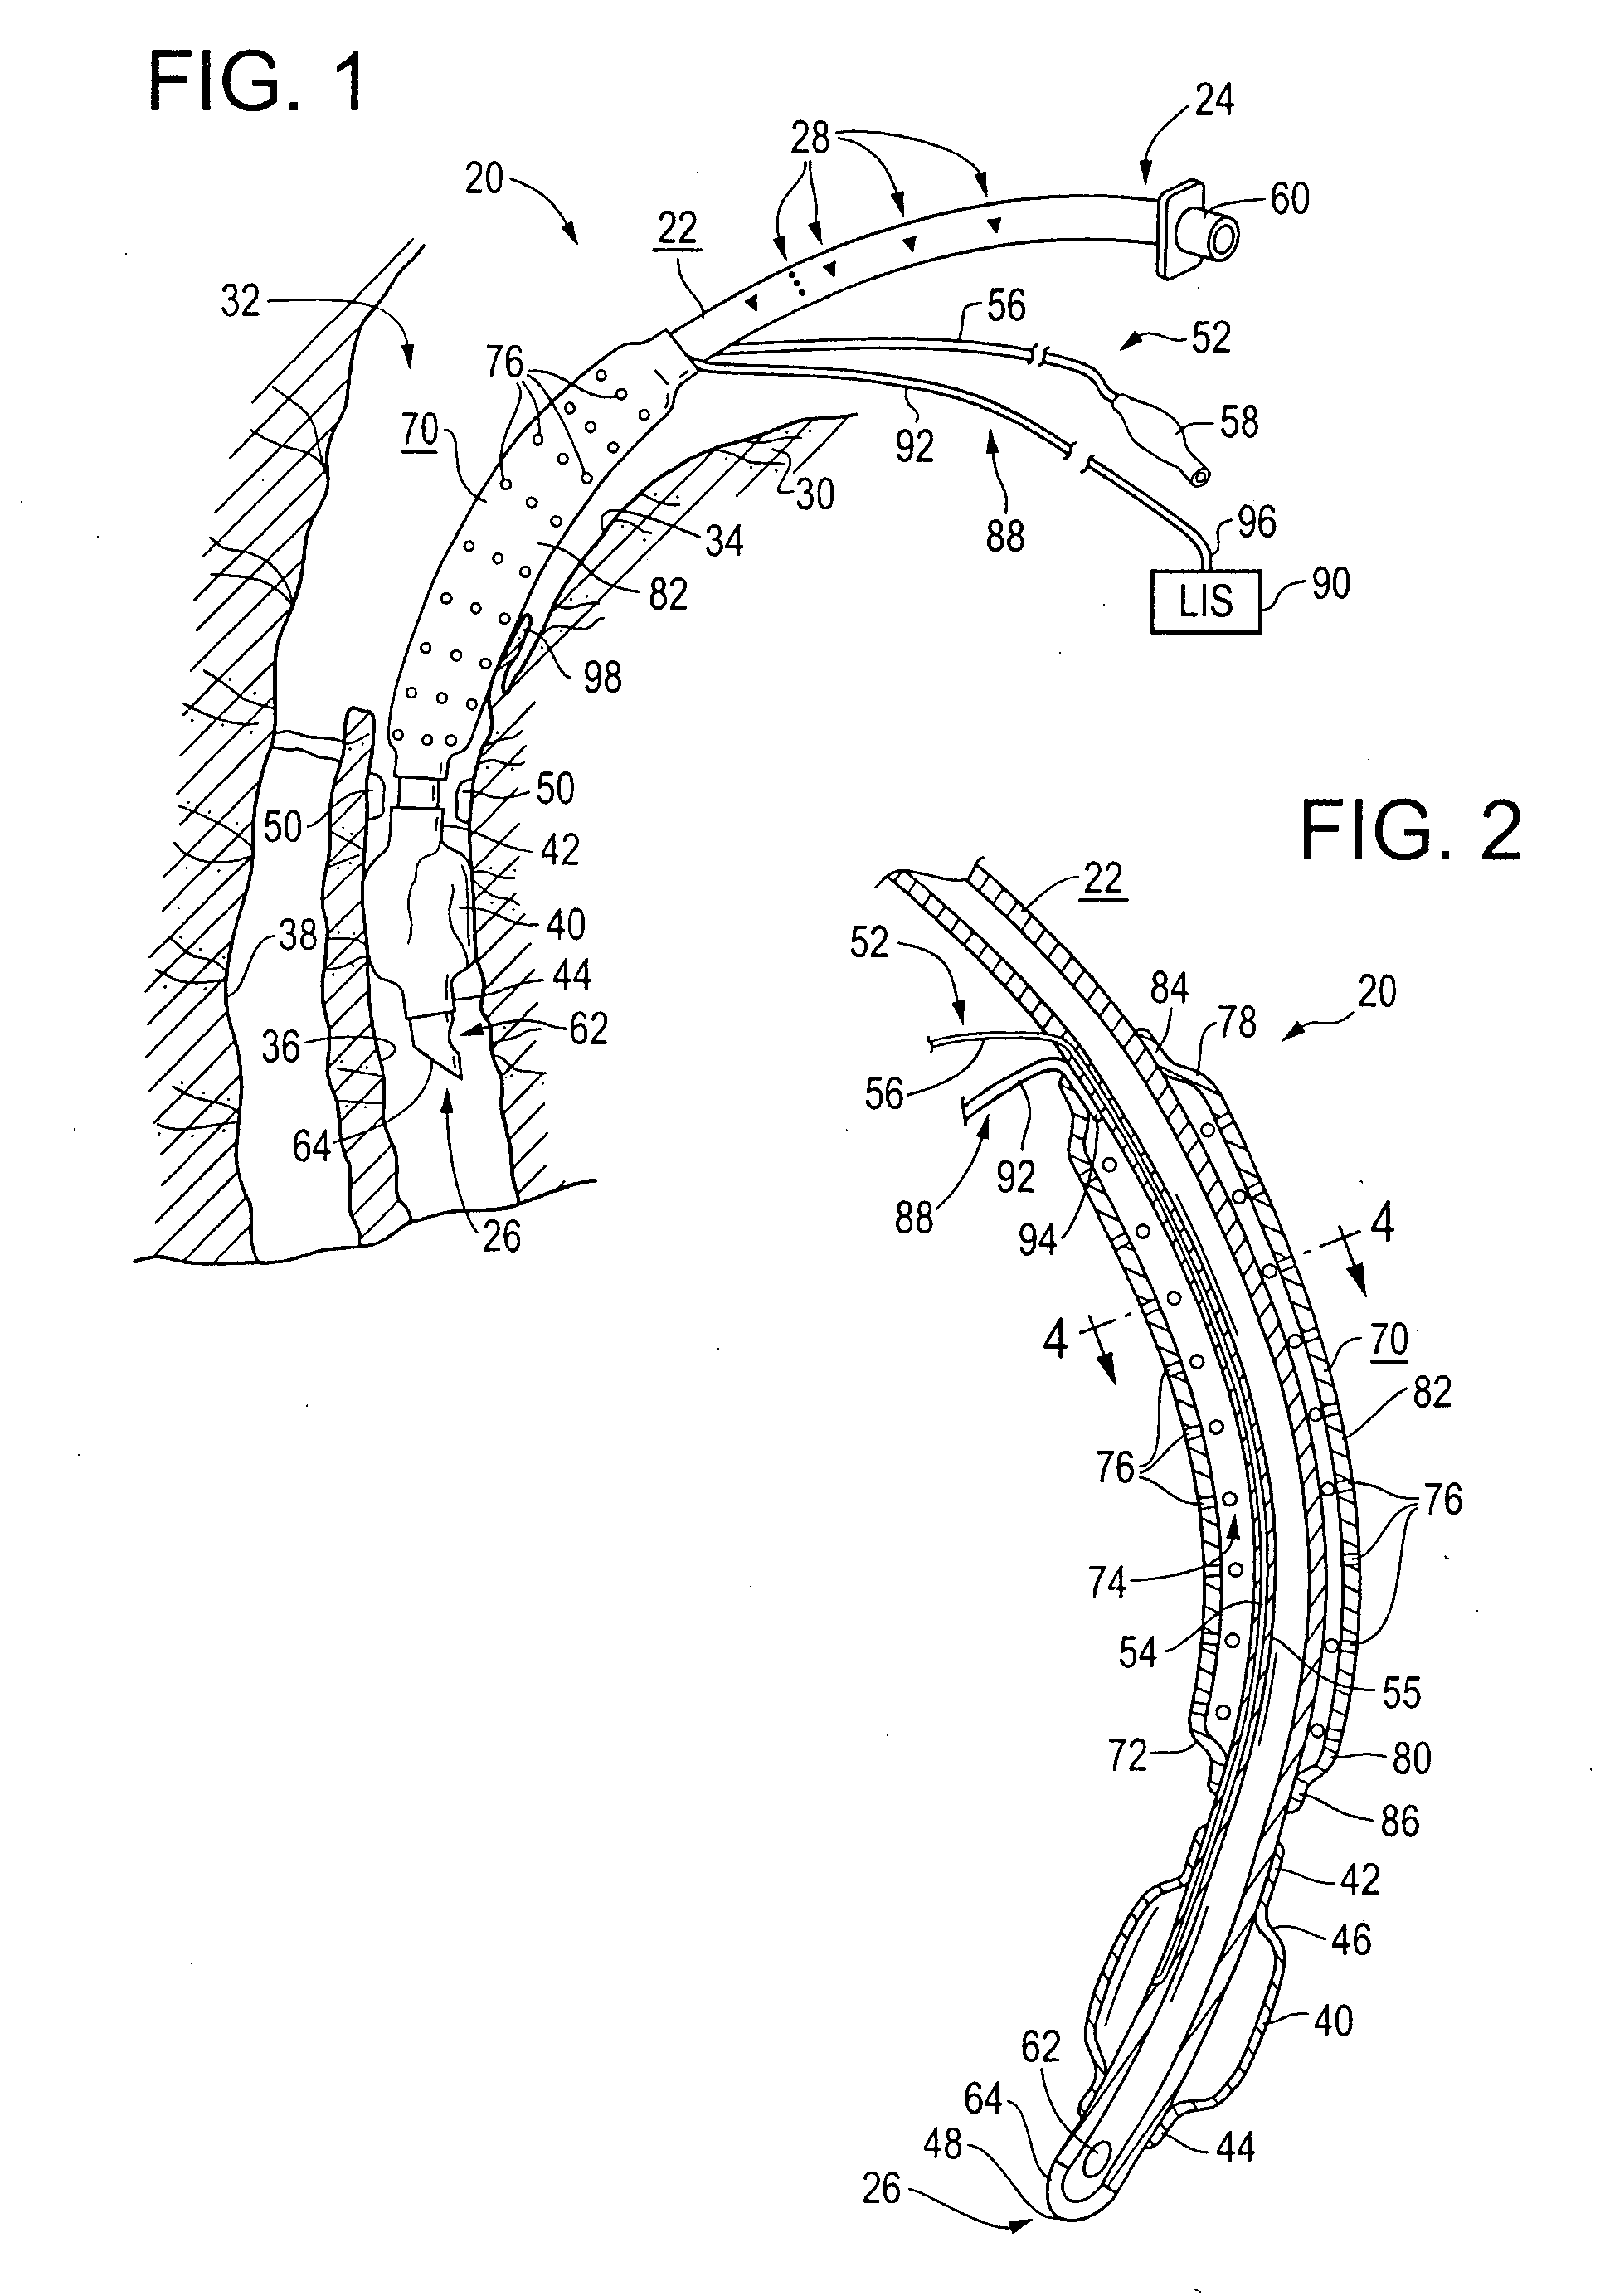 Endotracheal tube with suction attachment